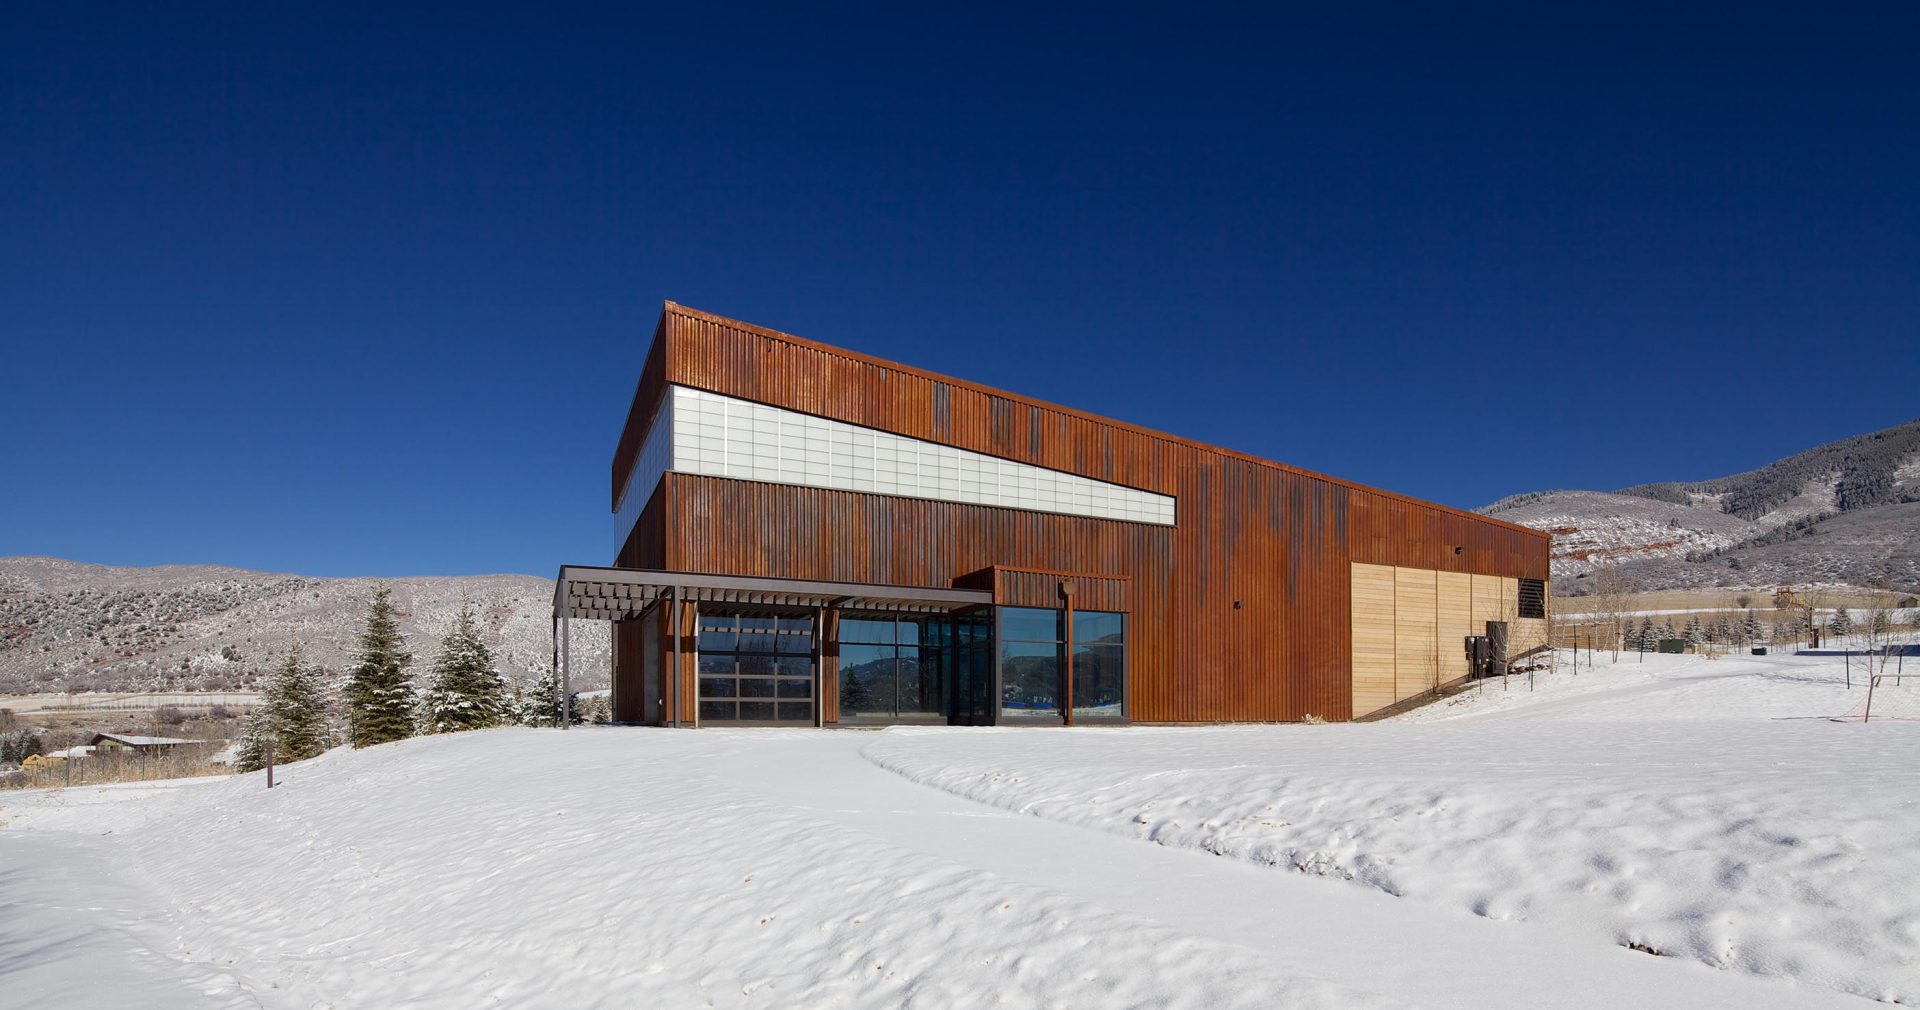 Aspen Community School exterior in winter with snow surrounding wooden building featuring Kalwall translucent window wall